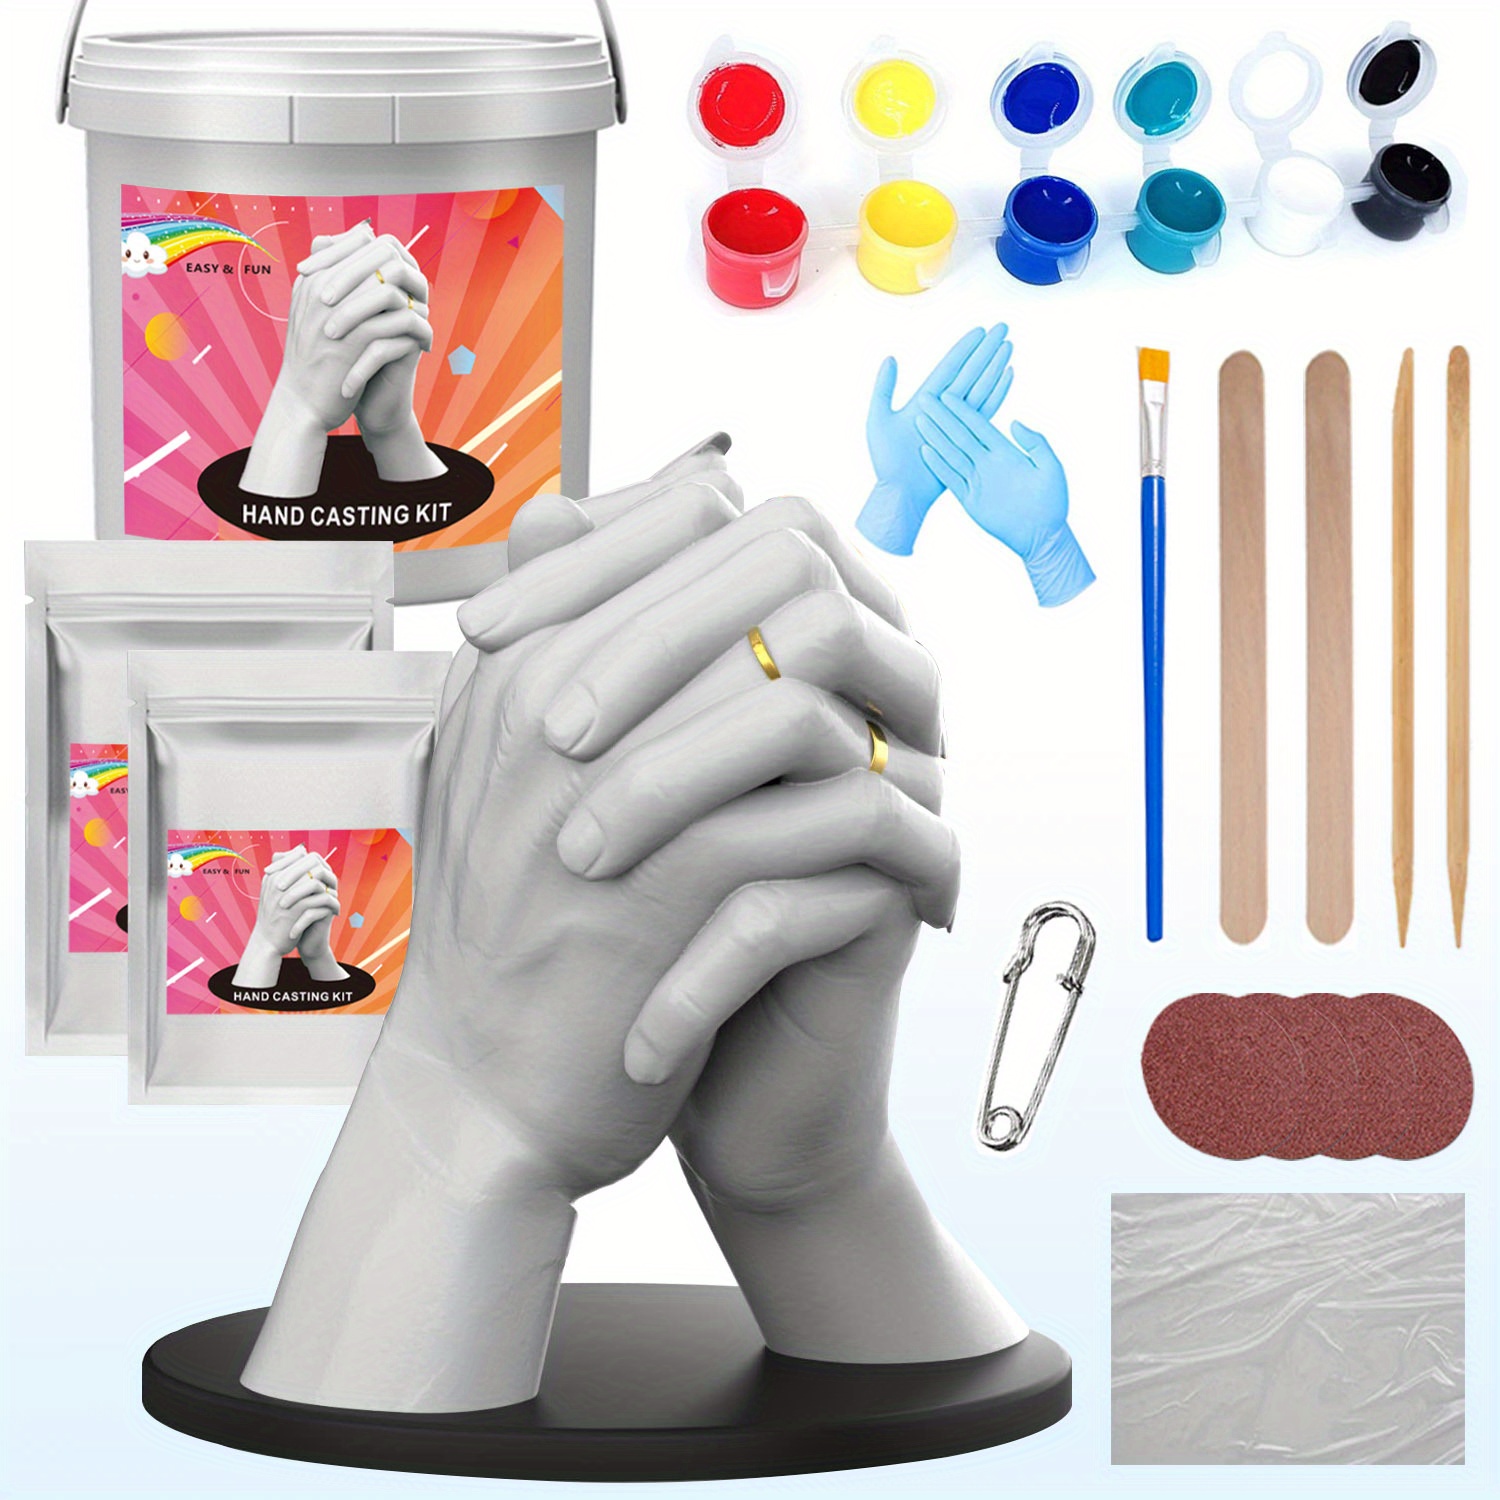 Hand Casting Kit Couples,PewinGo Plaster Hand Mold Casting Kit, Hand Mold  Kit Couples,DIY Gifts Ideas for